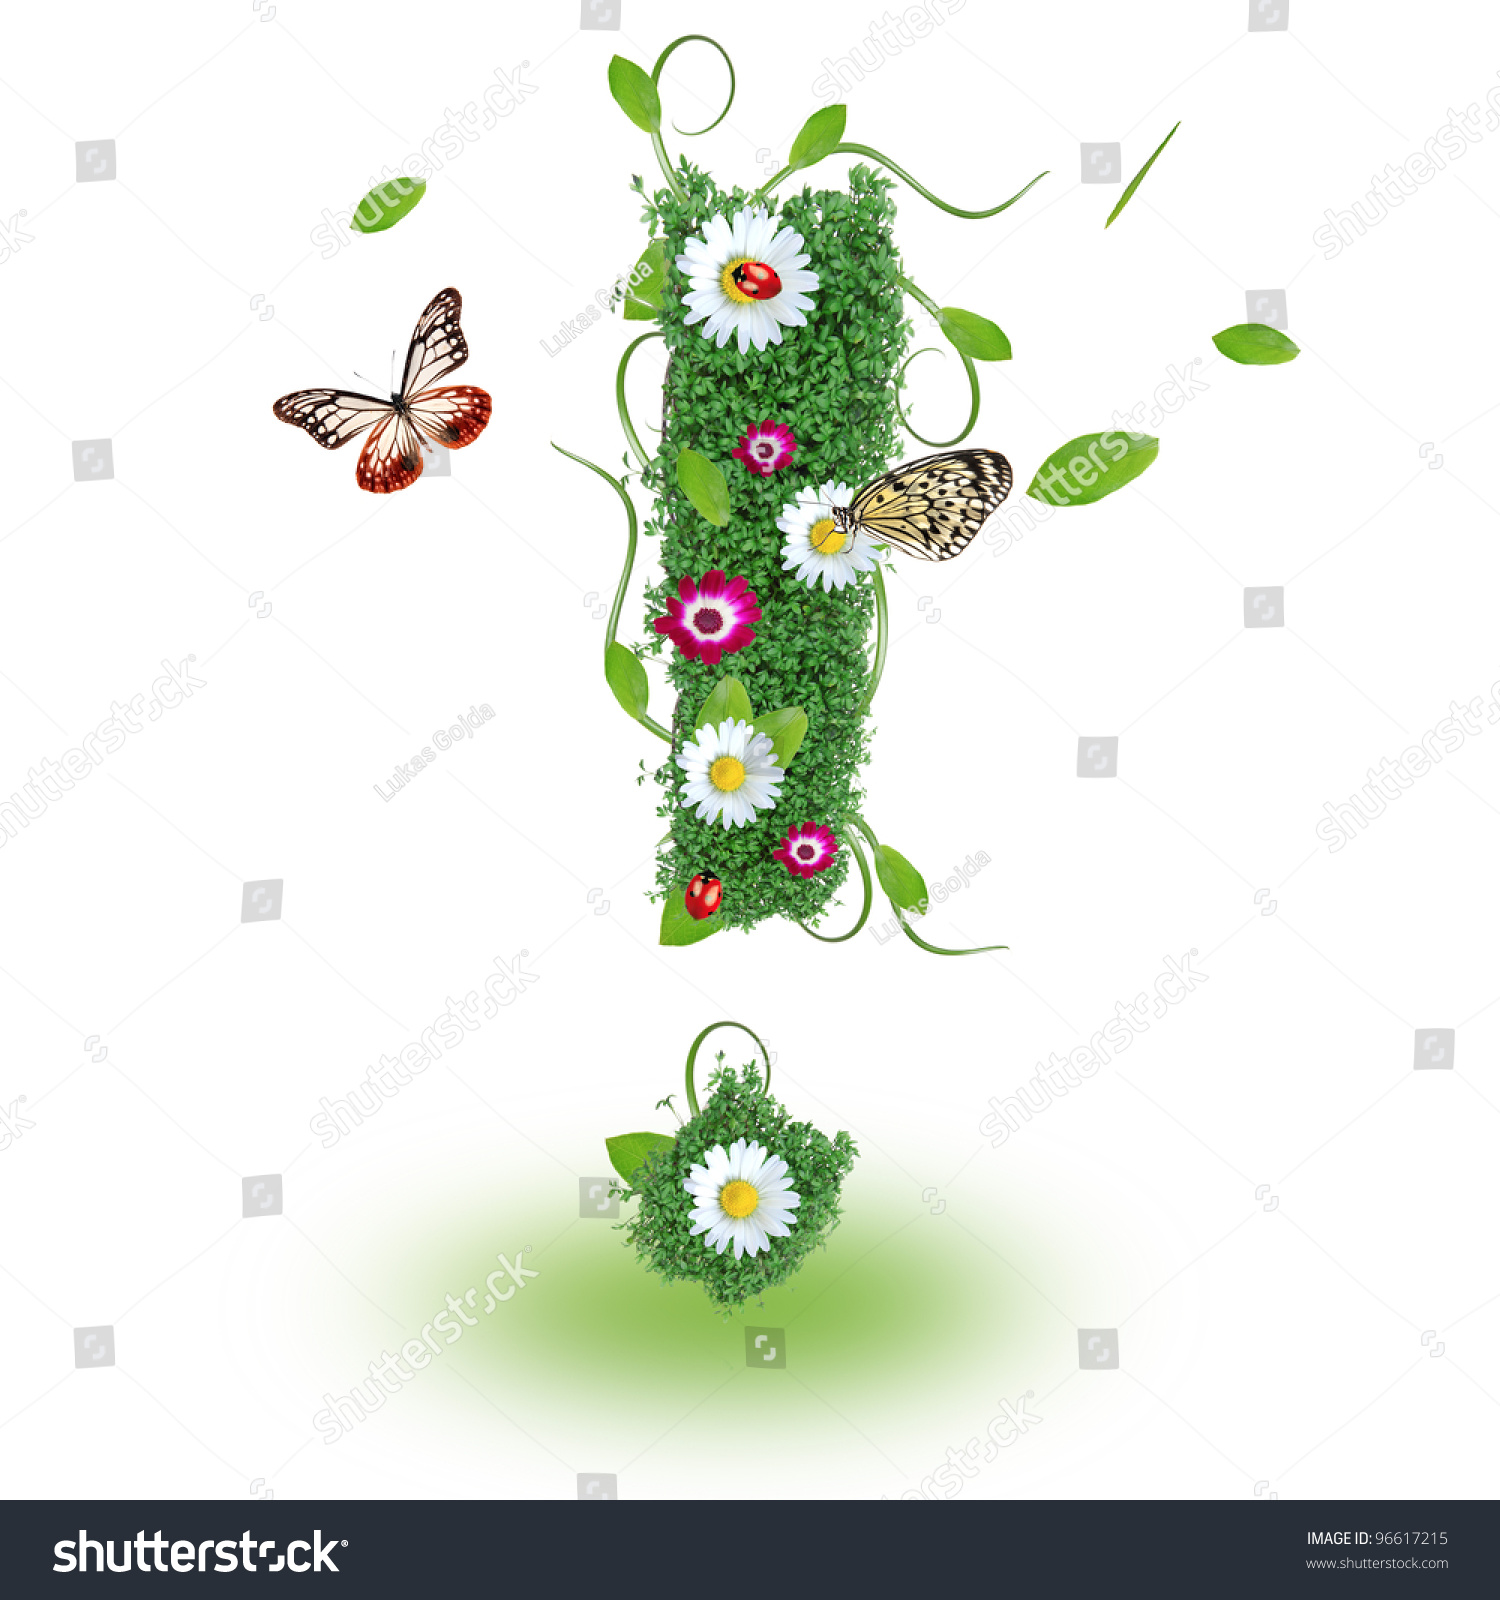 Beautiful Spring Exclamation Mark Stock Photo (Download Now ...